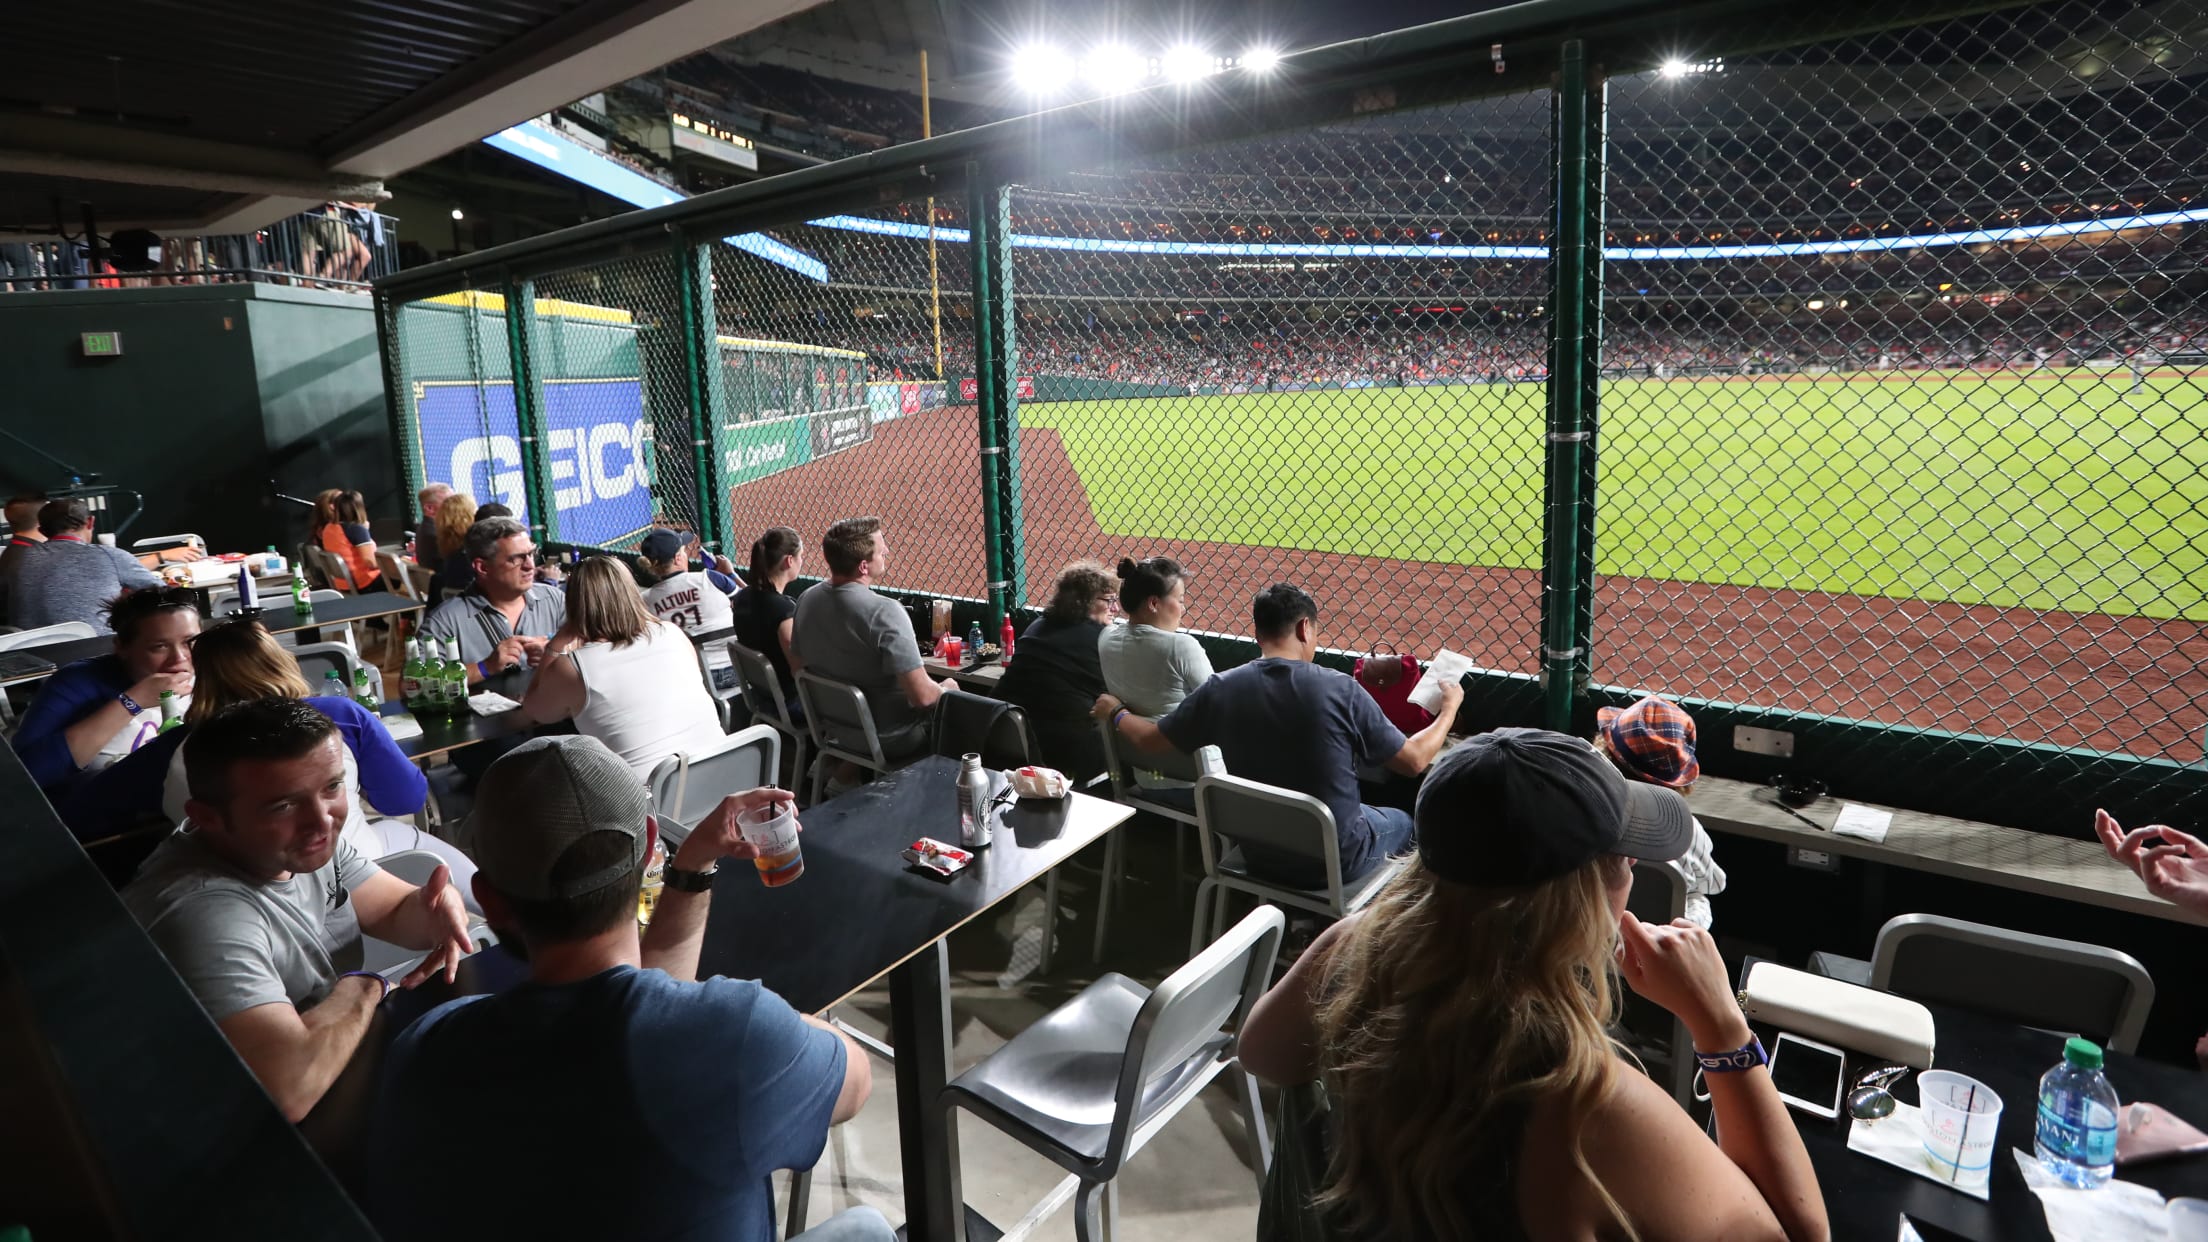 4Topps working with Reds on new seating in premium Lexus club